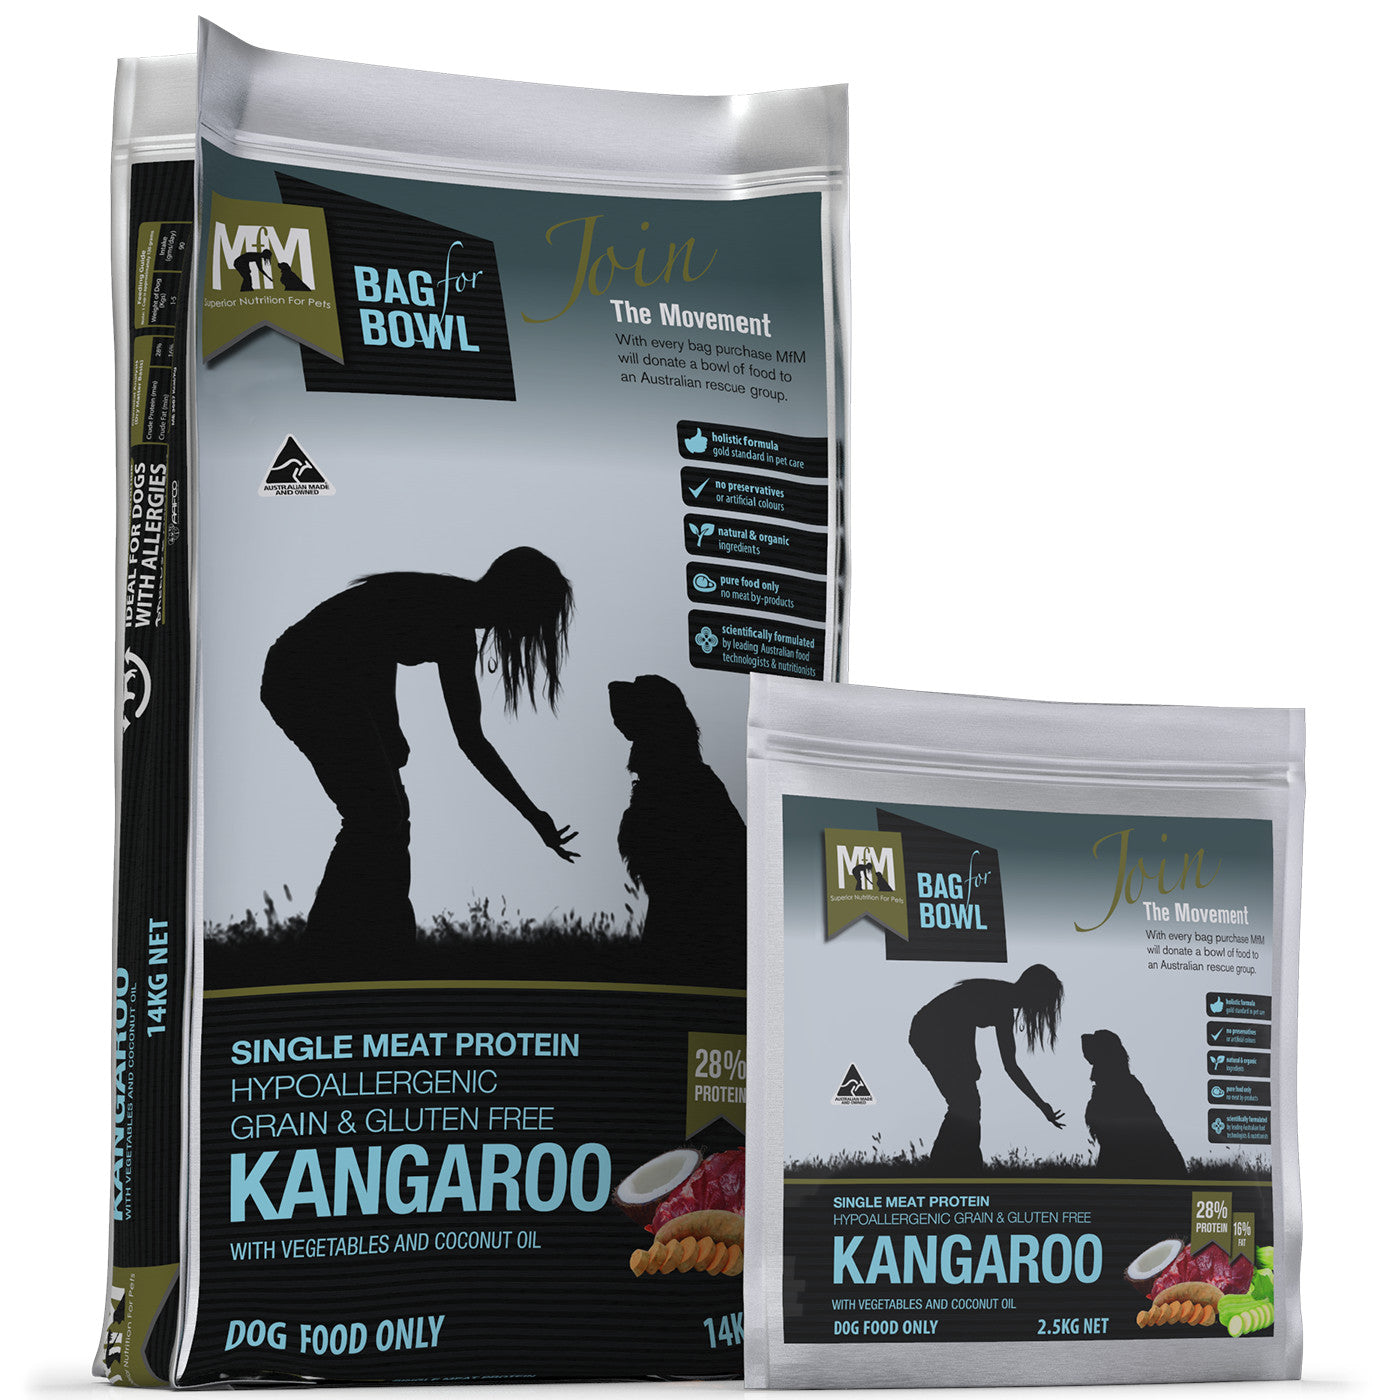 Meals for Mutts Kangaroo Single Meat Protein Dog Food.